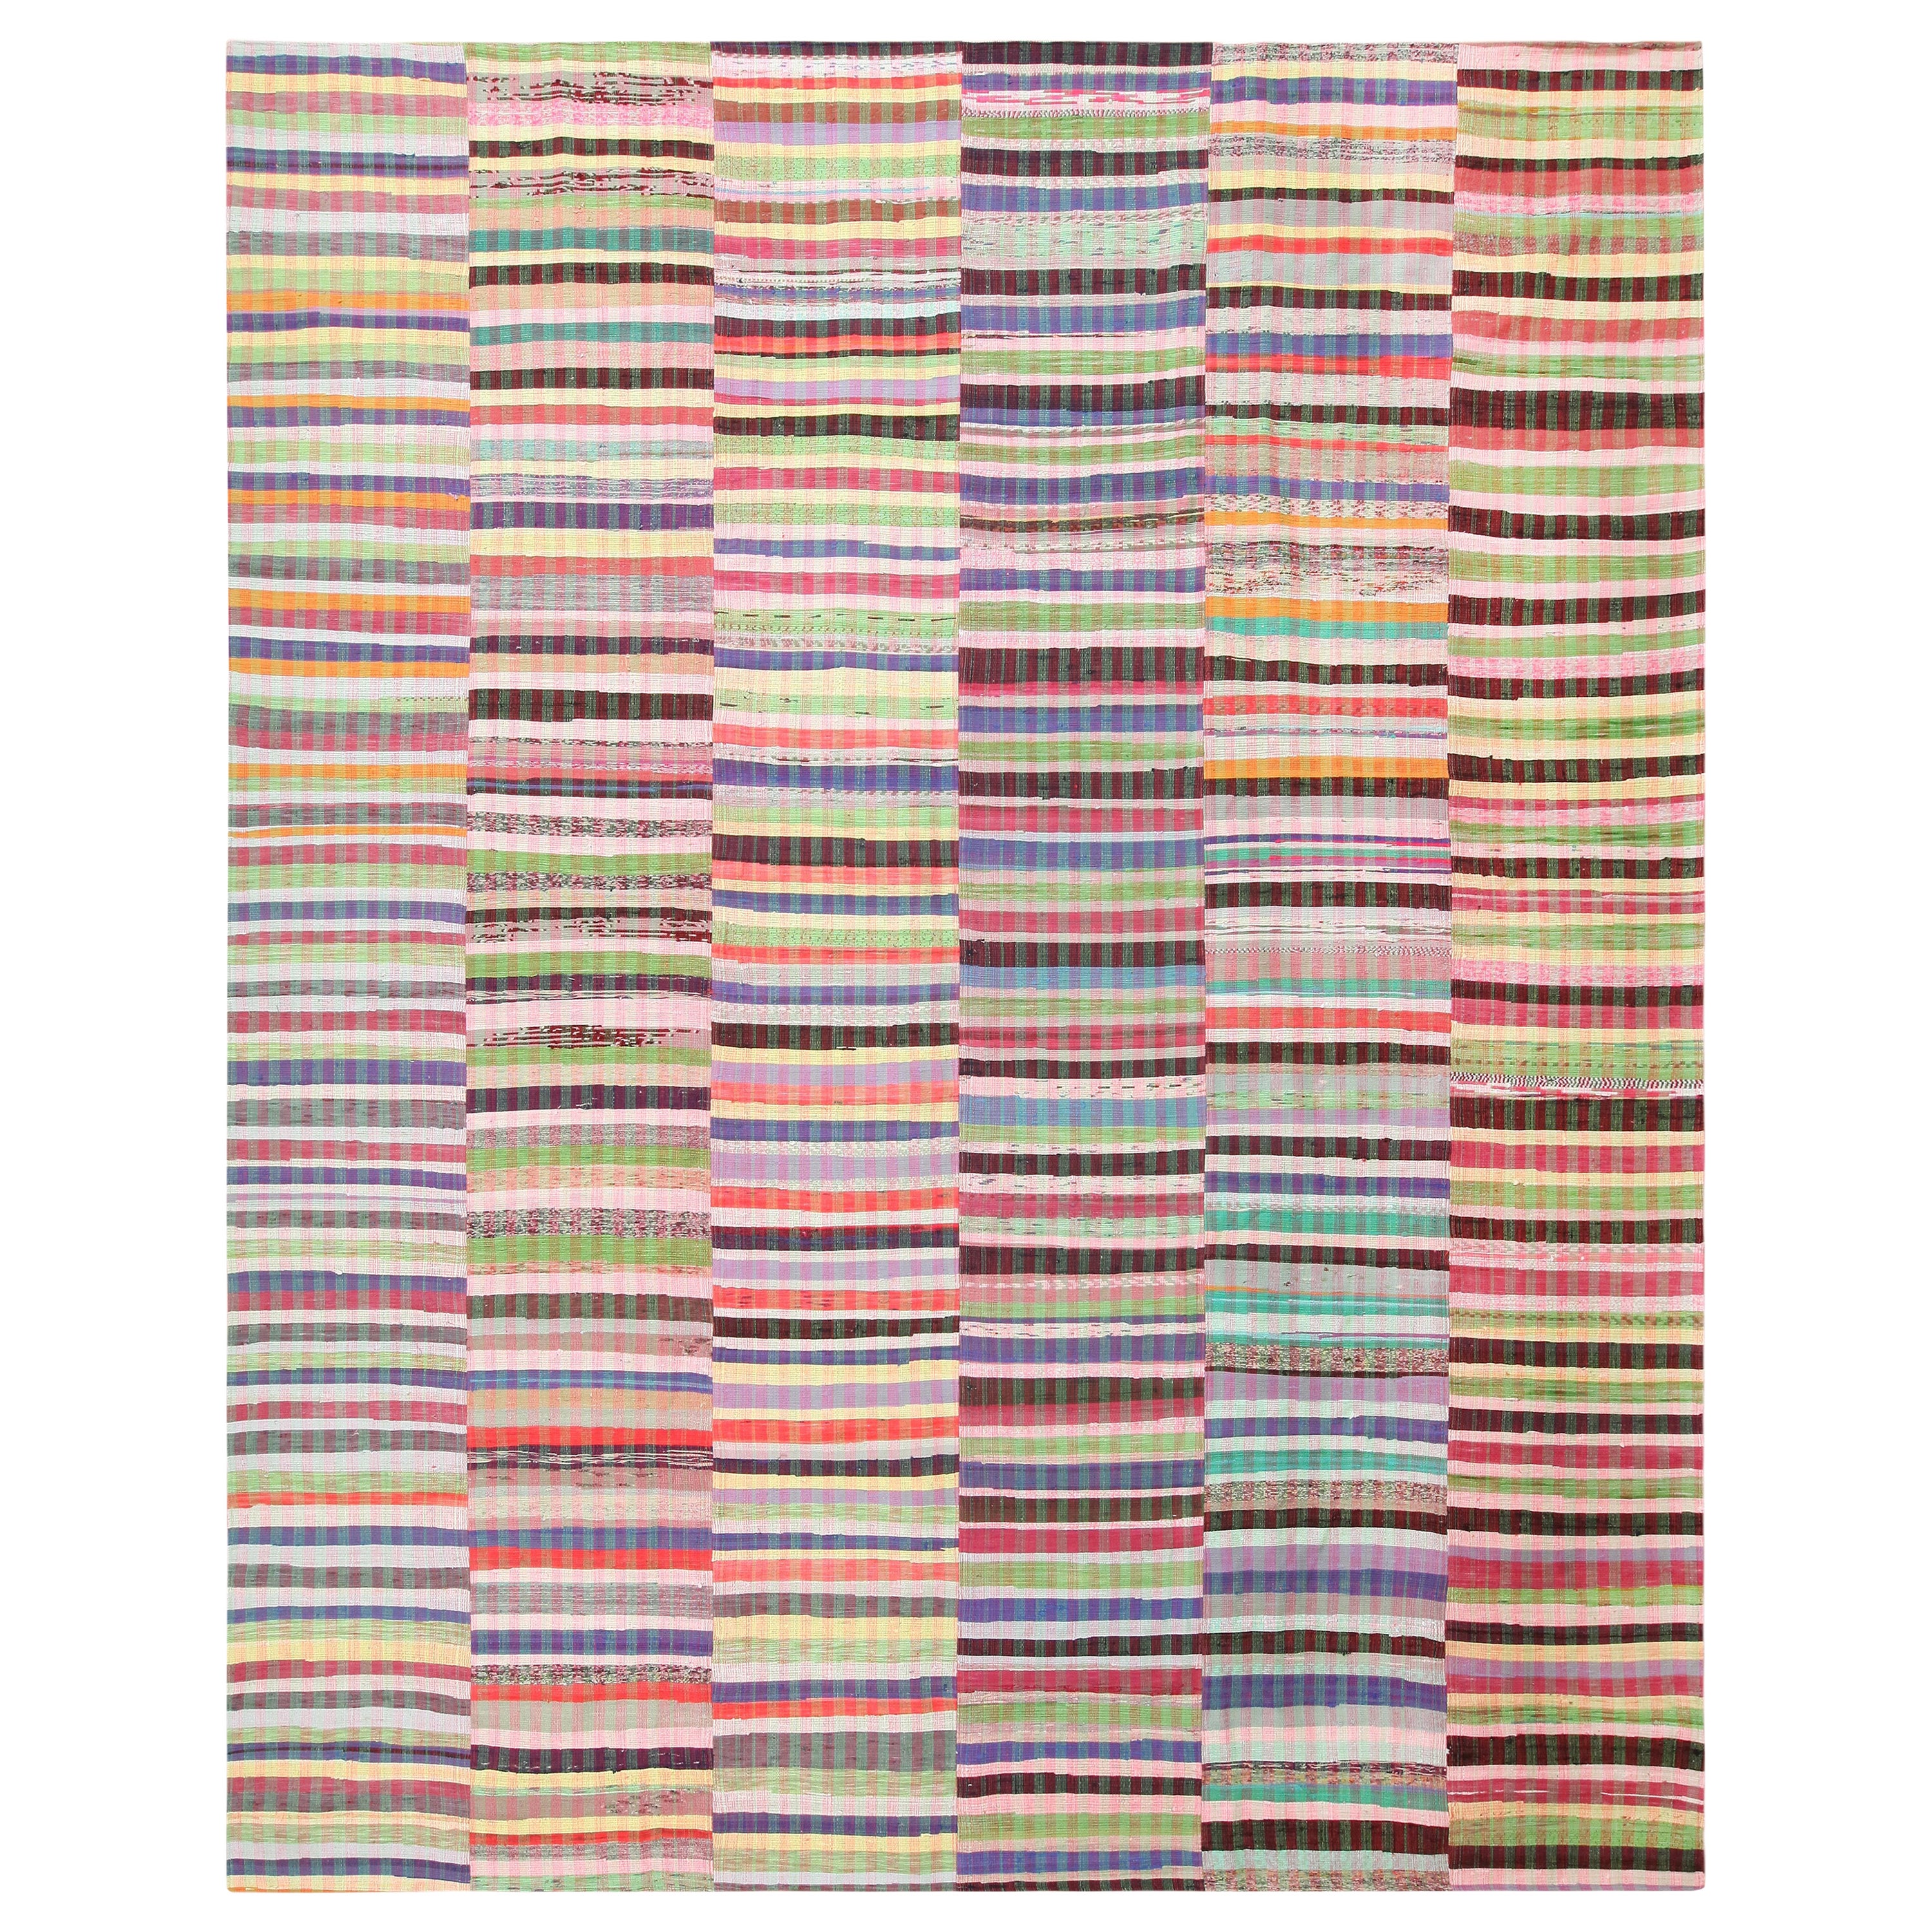 Nazmiyal Collection Rainbow Colors Striped Modern Rag Rug. 12 ft x 15 ft For Sale